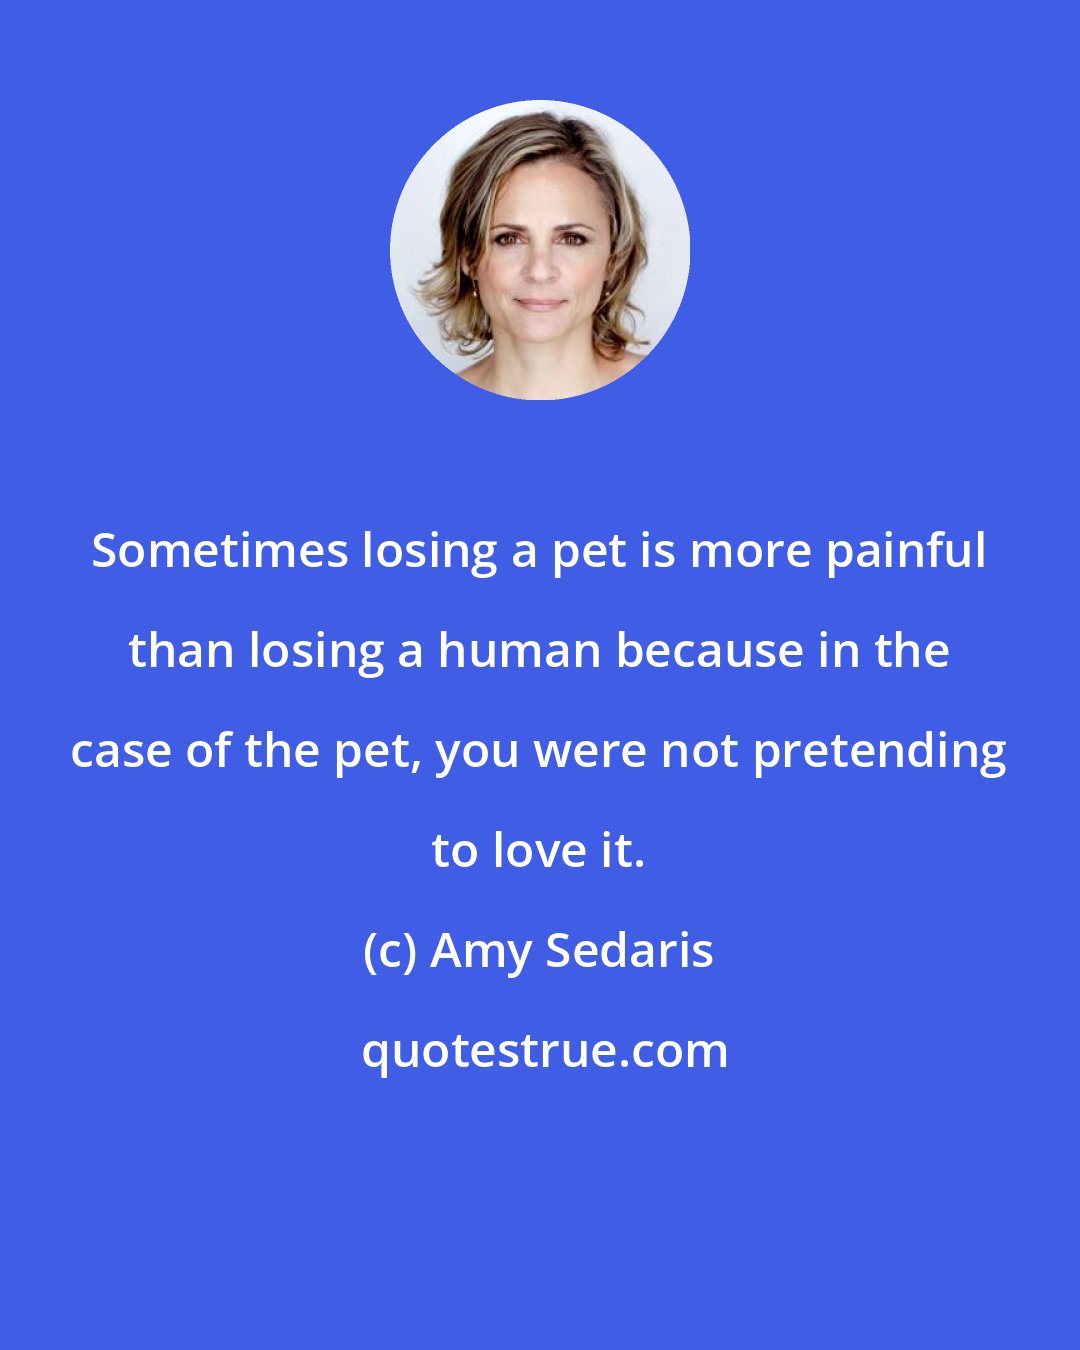 Amy Sedaris: Sometimes losing a pet is more painful than losing a human because in the case of the pet, you were not pretending to love it.